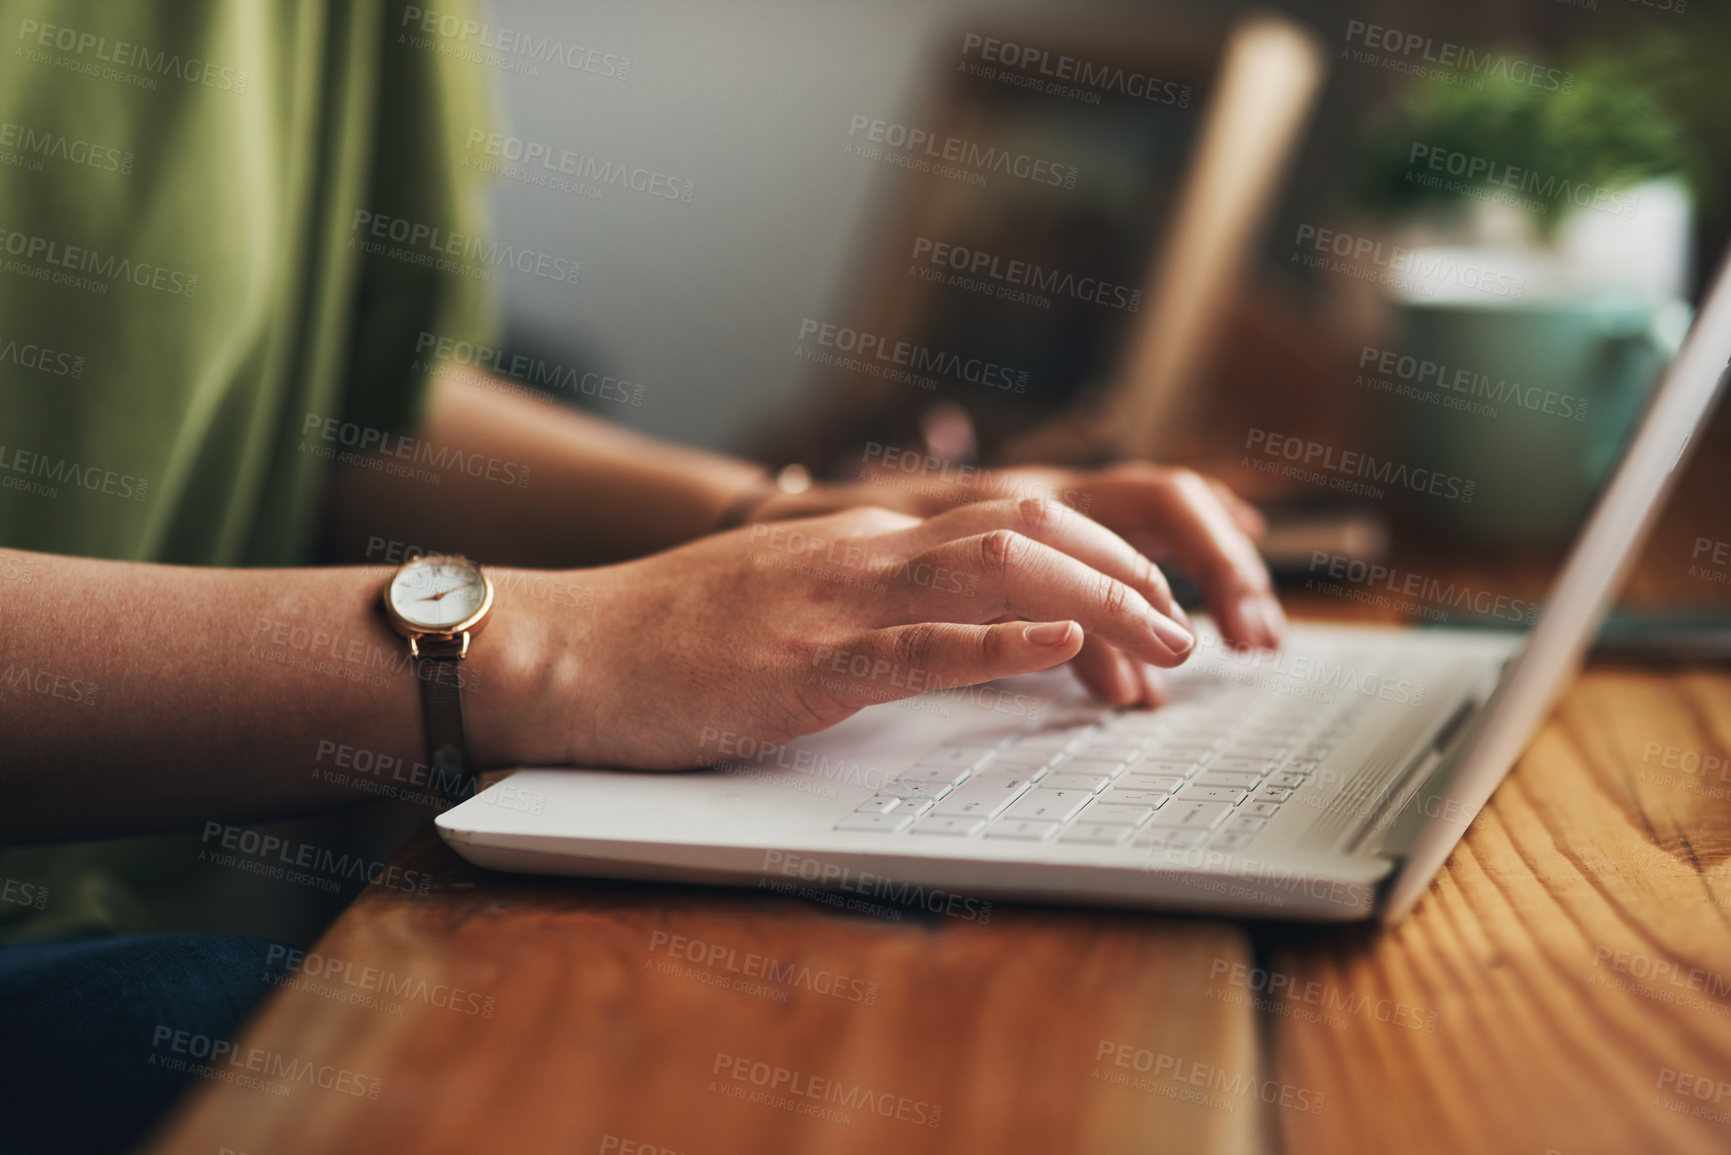 Buy stock photo Cropped shot of a woman using a laptop while working from home